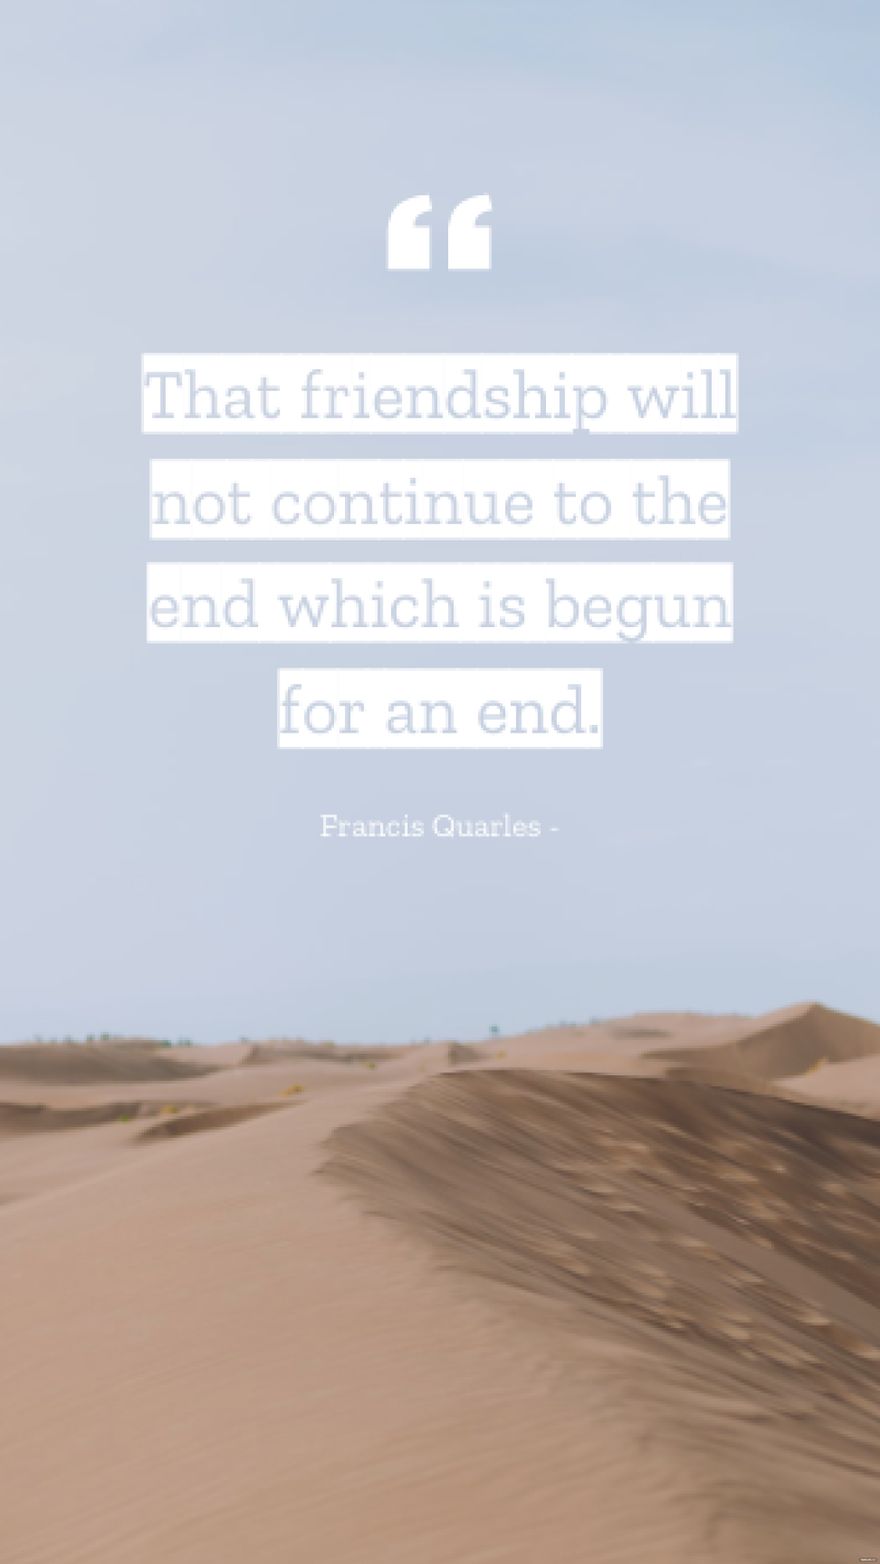 Francis Quarles - That friendship will not continue to the end which is begun for an end.